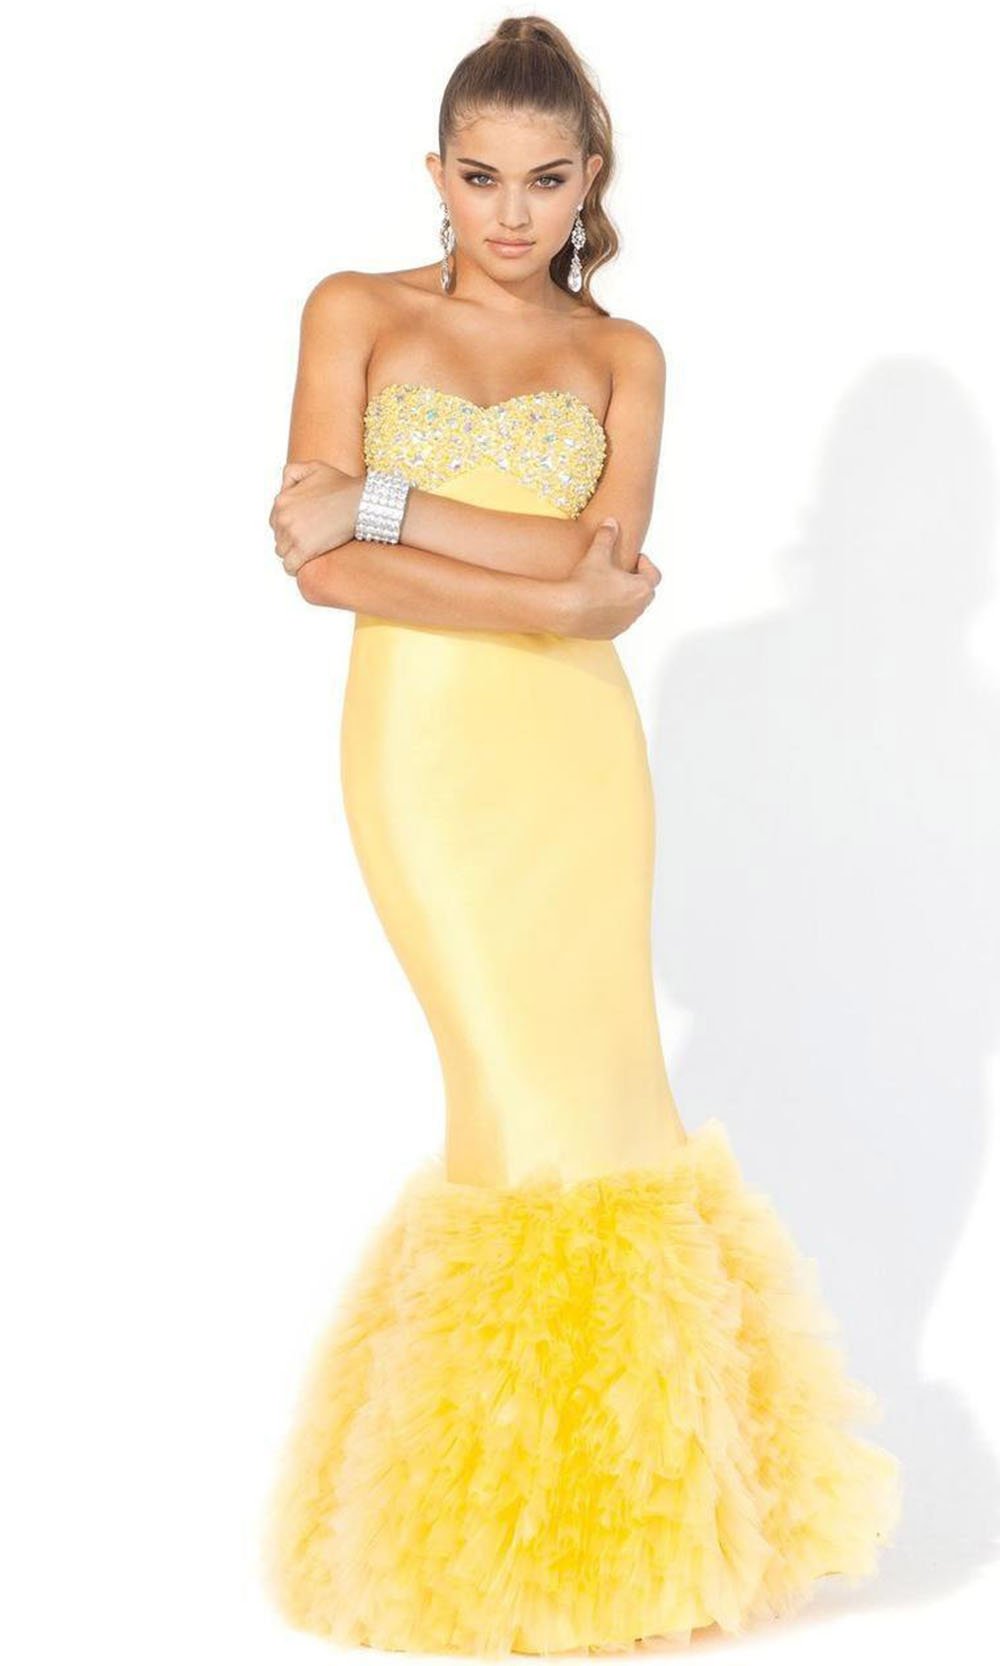 Blush by Alexia Designs - Beaded Strapless Sweetheart Ruffles Tulle Mermaid Gown 9300SC In Yellow